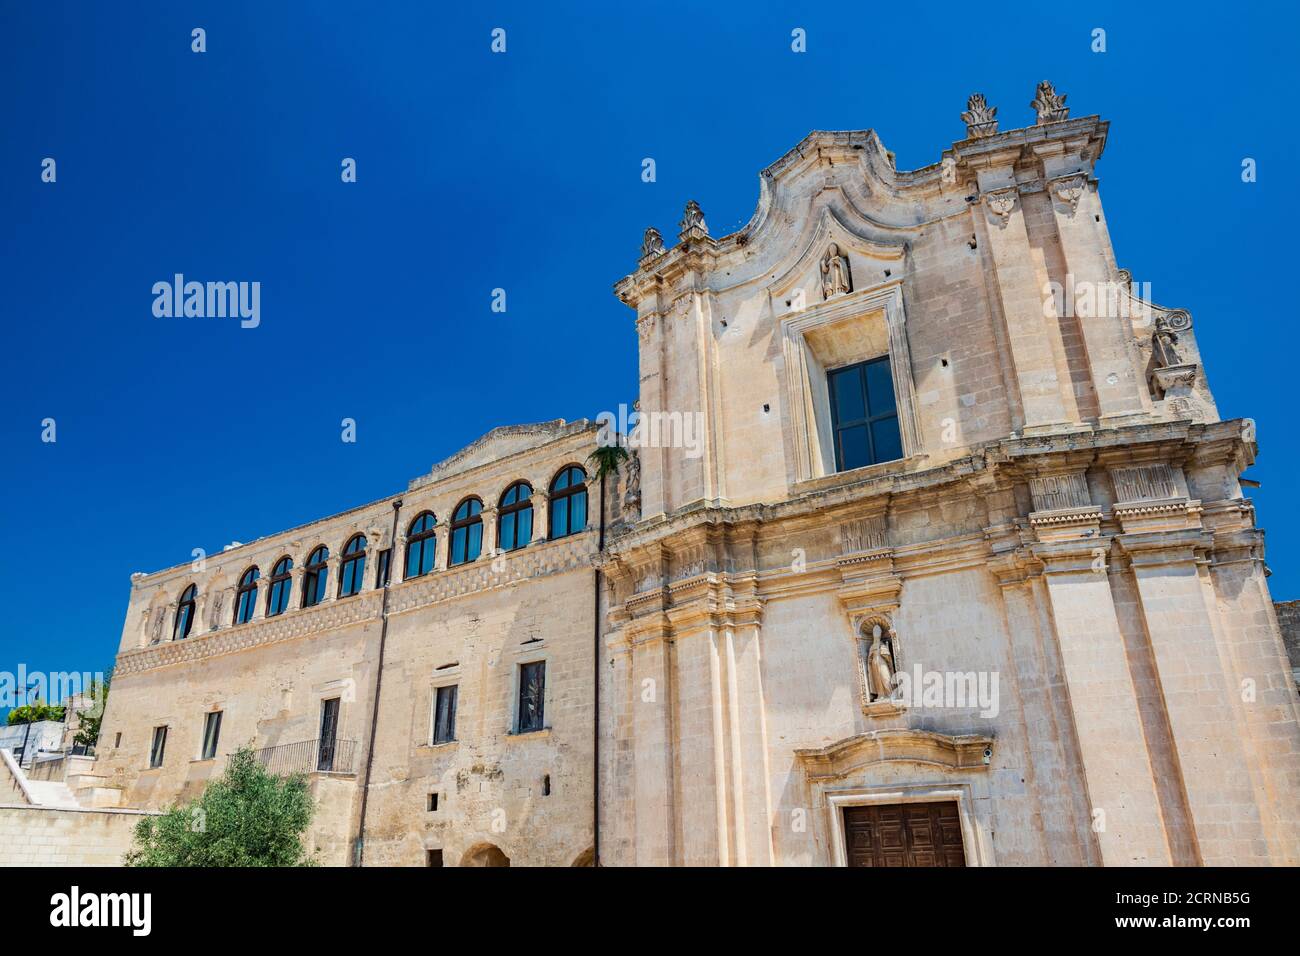 Matera, Basilicata, Italy - The church and convent of Sant'Agostino, in the Sasso Barisano, built on the ancient rupestrian crypt of San Giuliano. Stock Photo